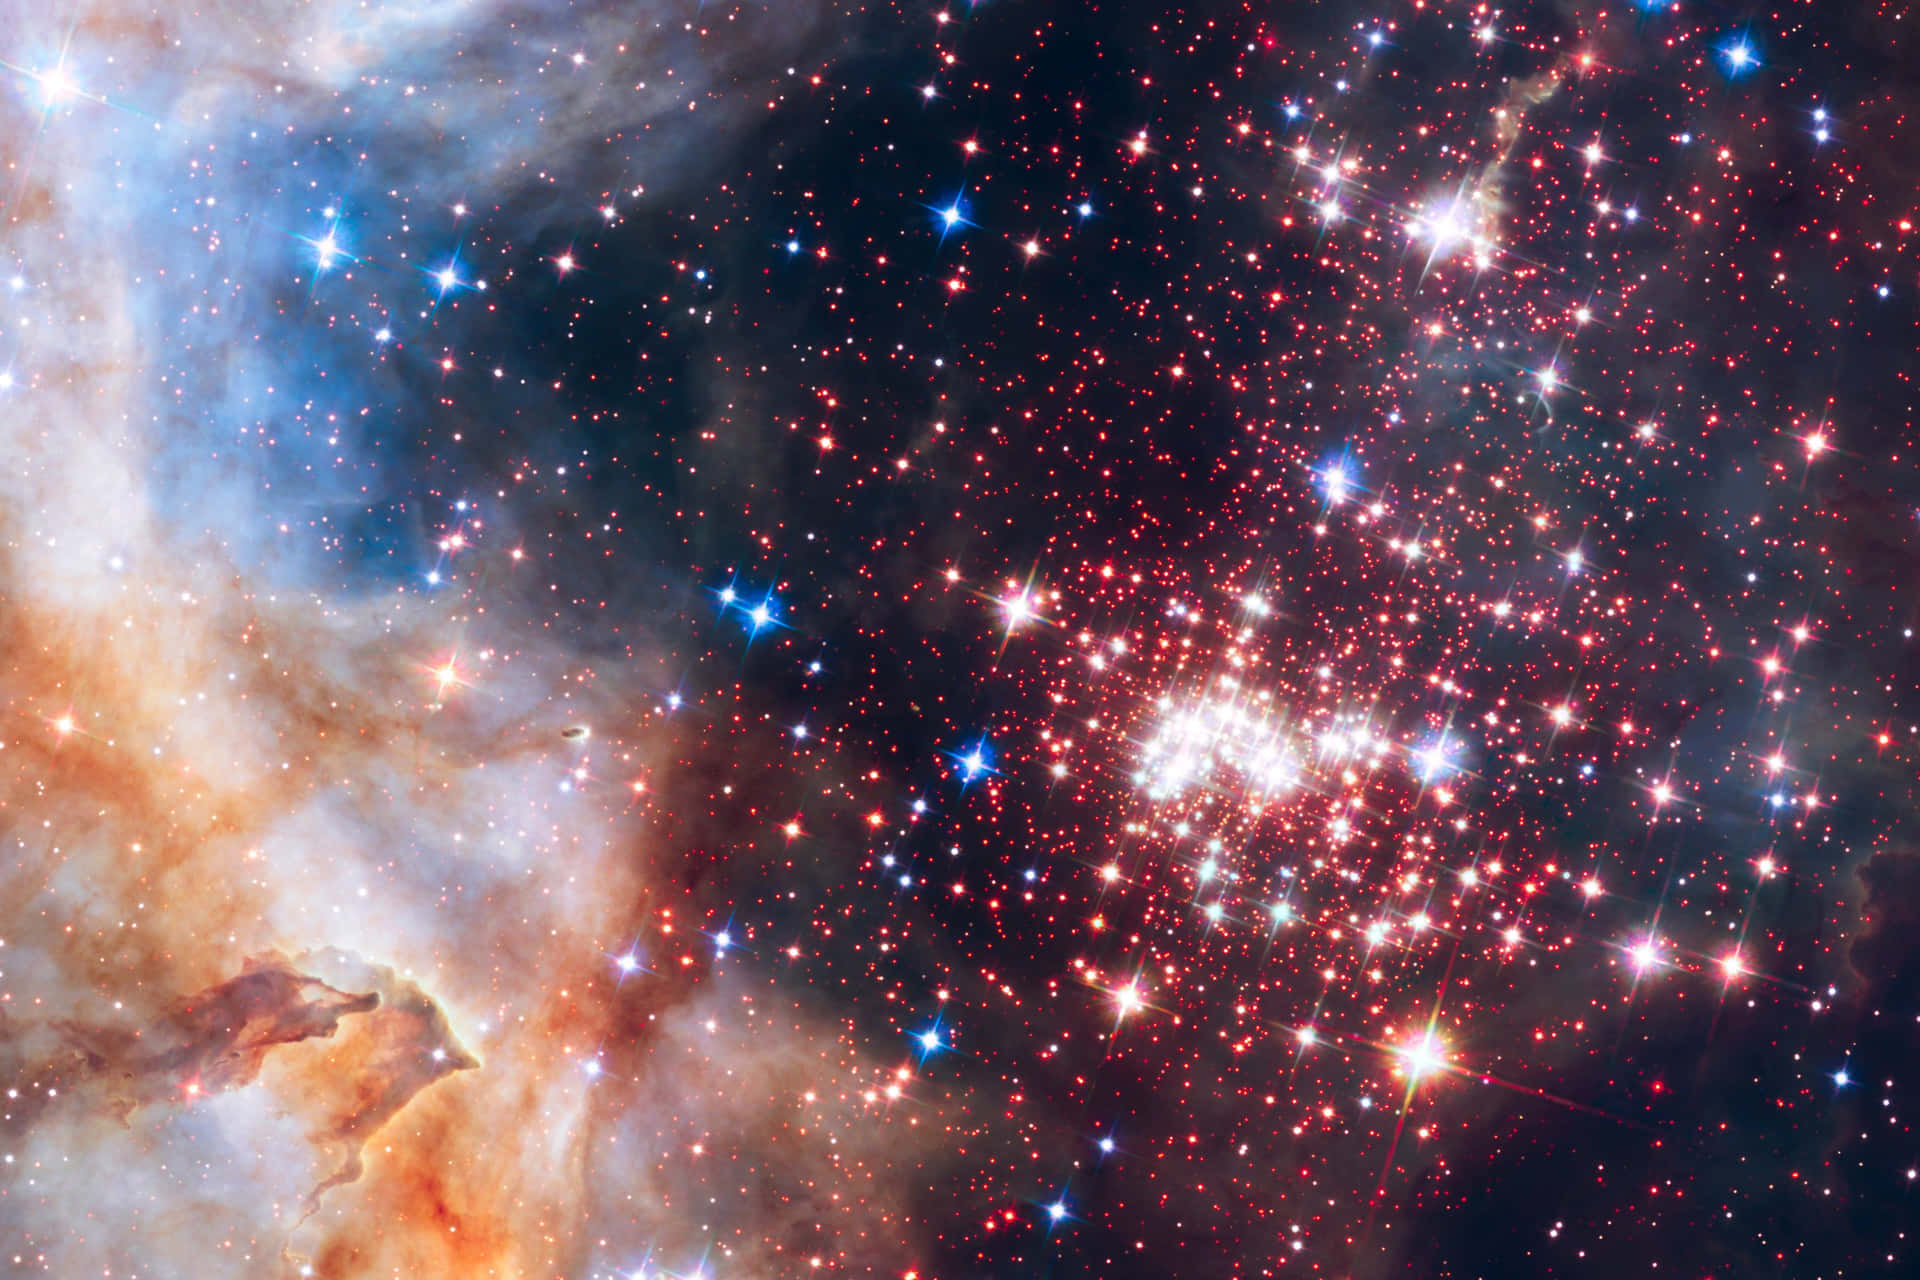 Enchanting Star Cluster in the Cosmos Wallpaper